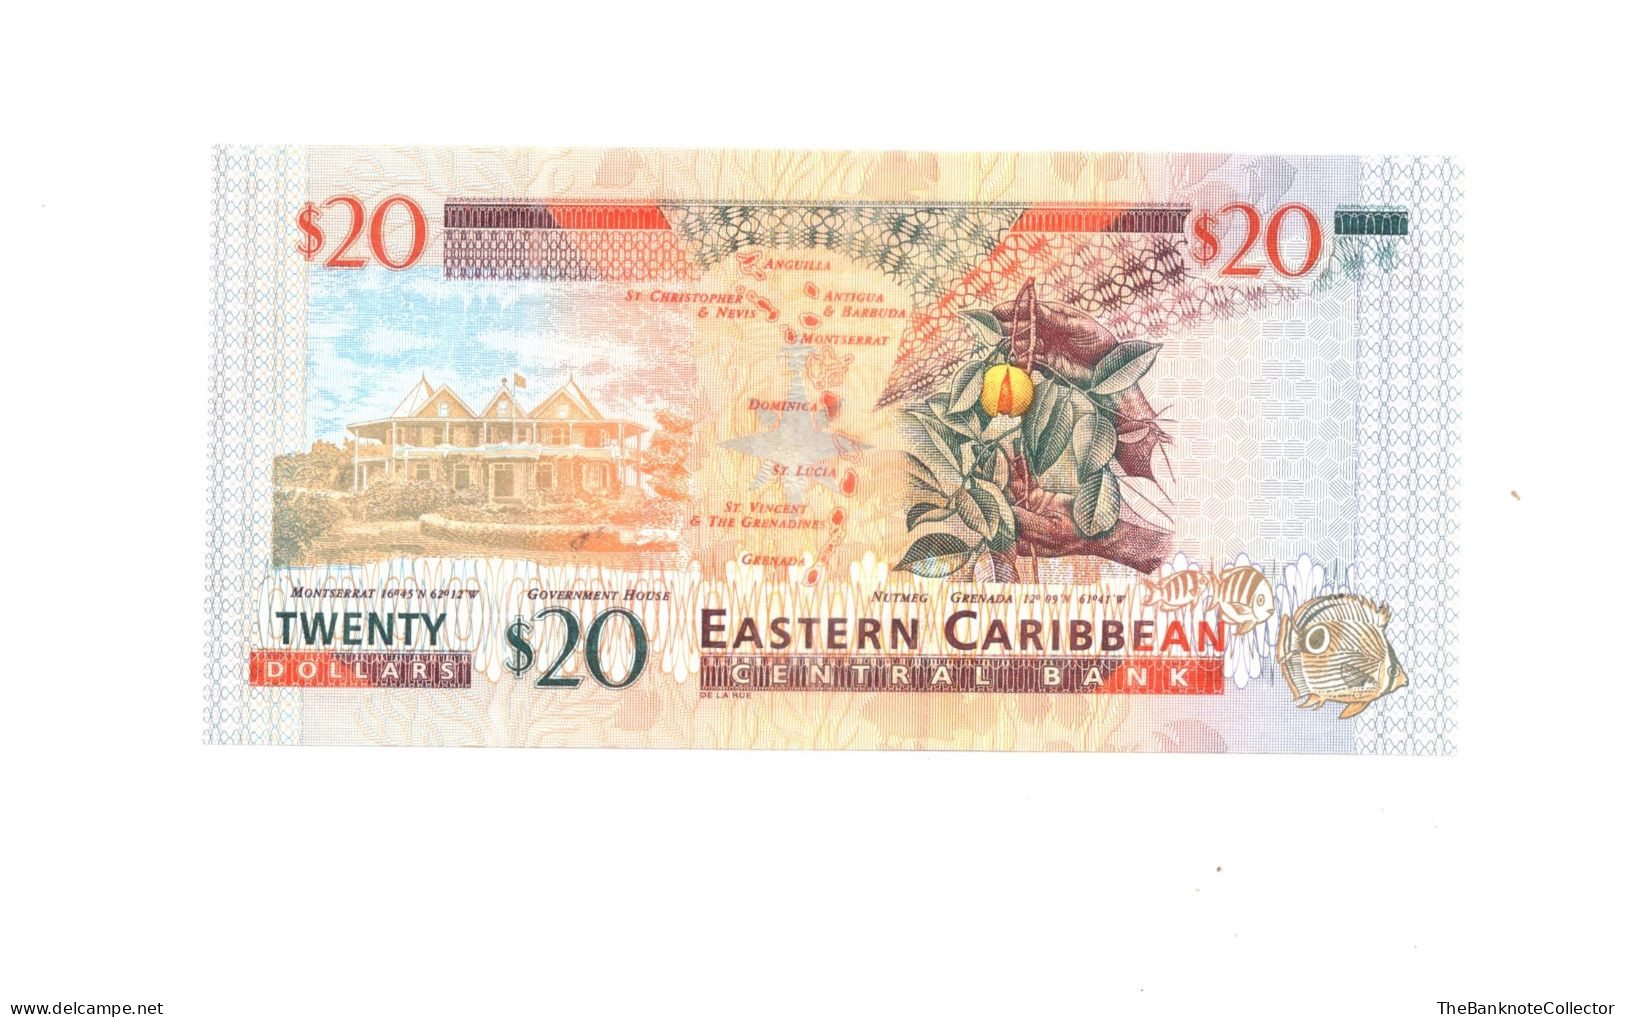 Eastern Caribbean Central Bank 20 Dollars ND 2003 QEII P-44v UNC - Caribes Orientales